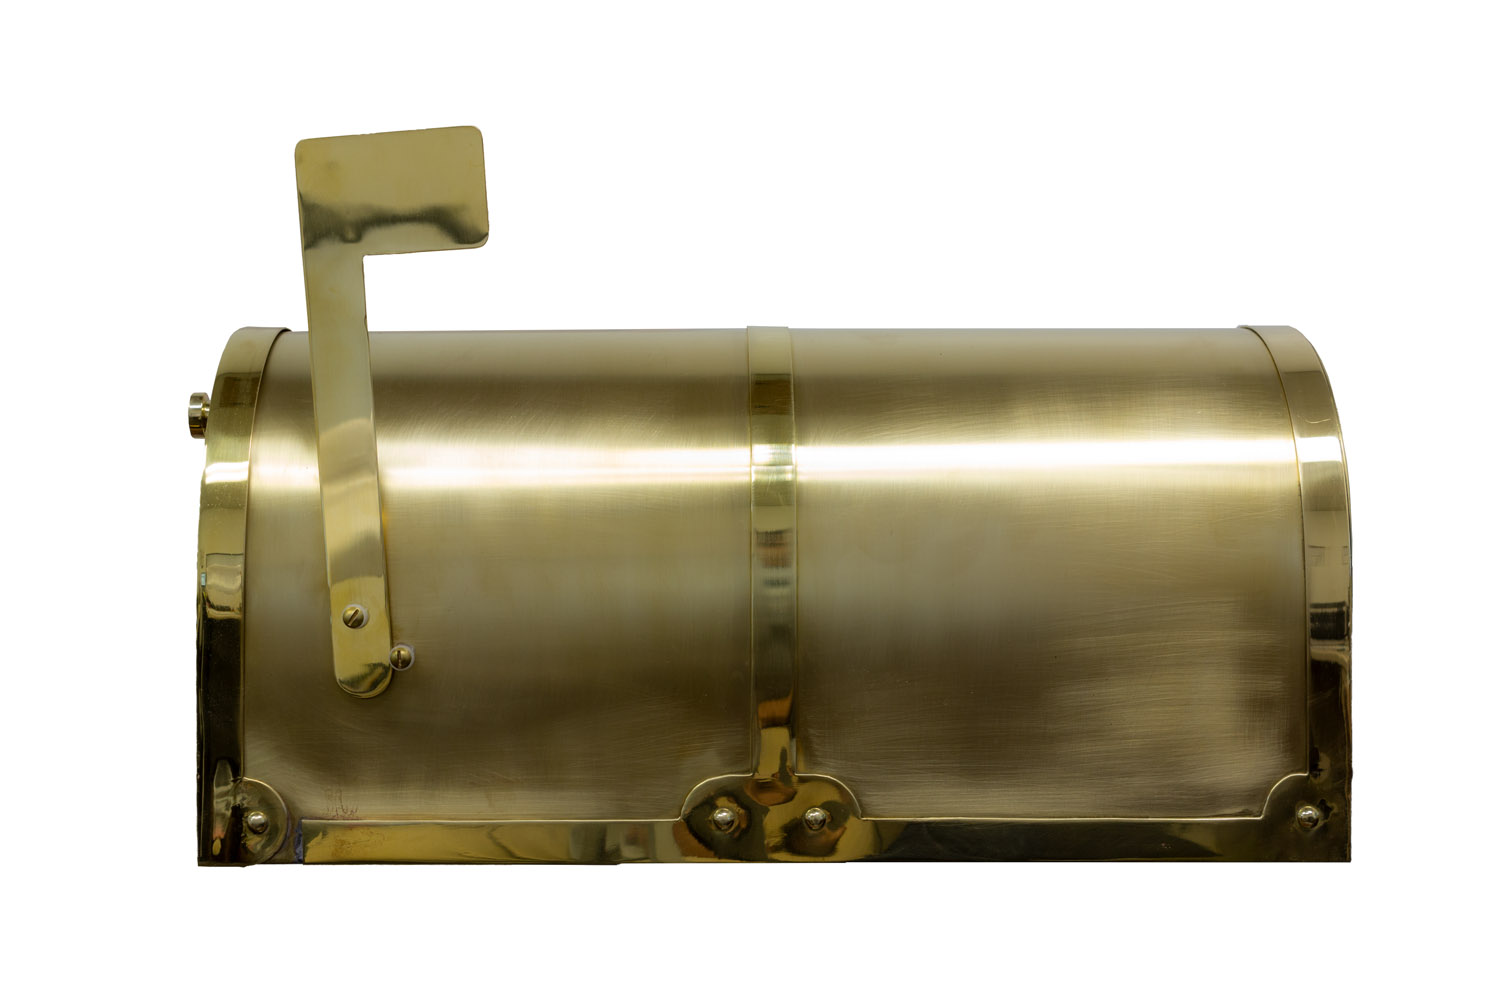 Provincial Collection Brass Mailboxes (Rural) Mb-3000 Polished Brass - image 1 of 3